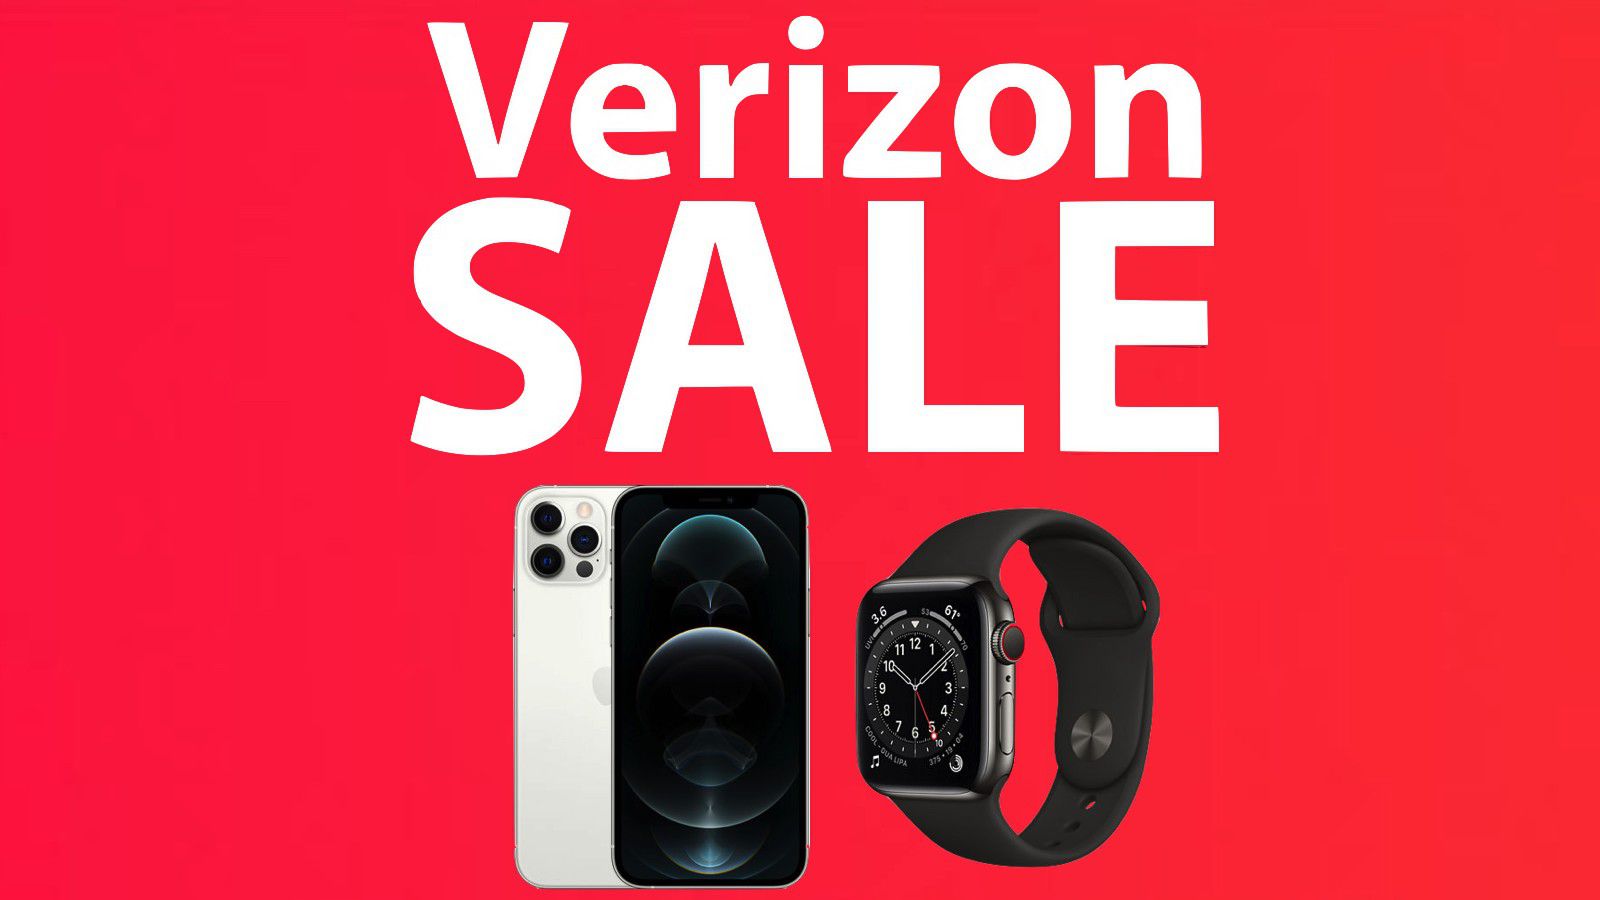 Deals: Verizon's Back To School Event Includes Savings on iPhone 12